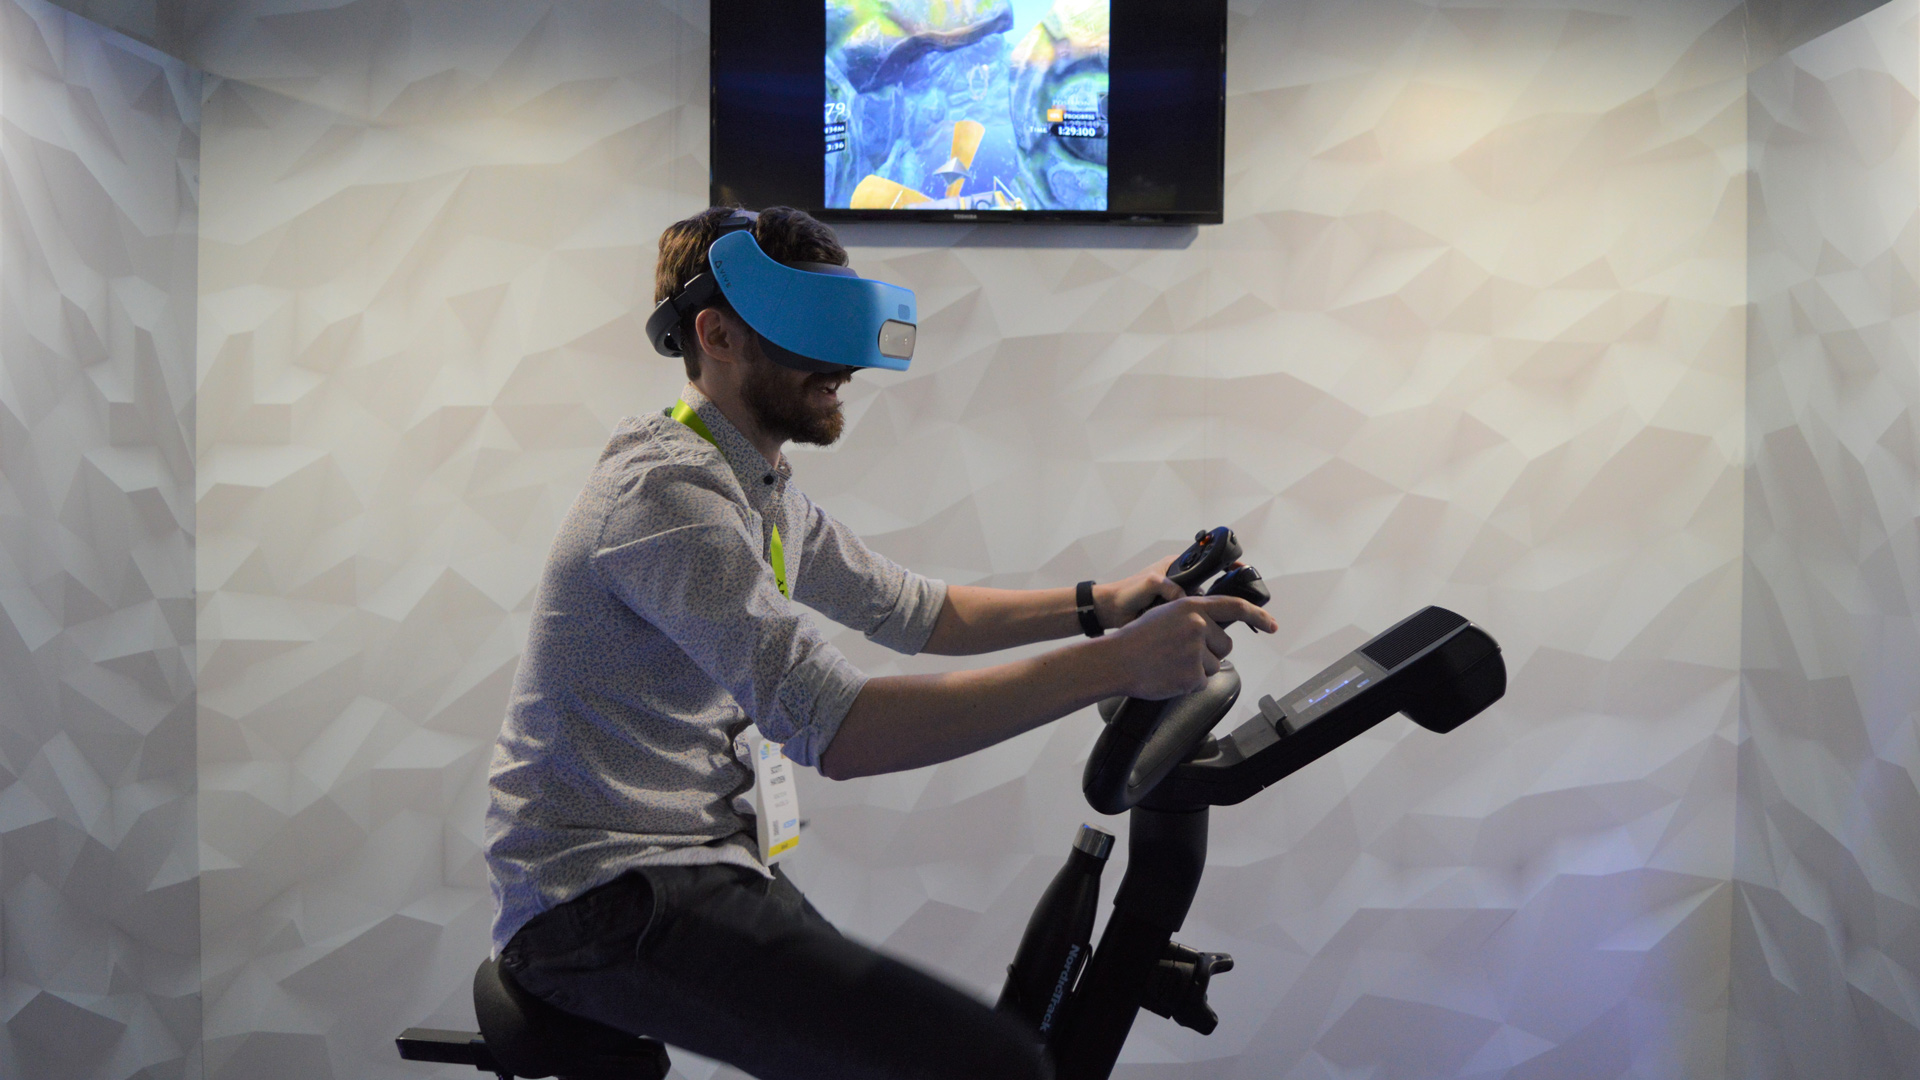 CES 2019: One of the Biggest Names in Home Fitness is Making VR Exercise Bike